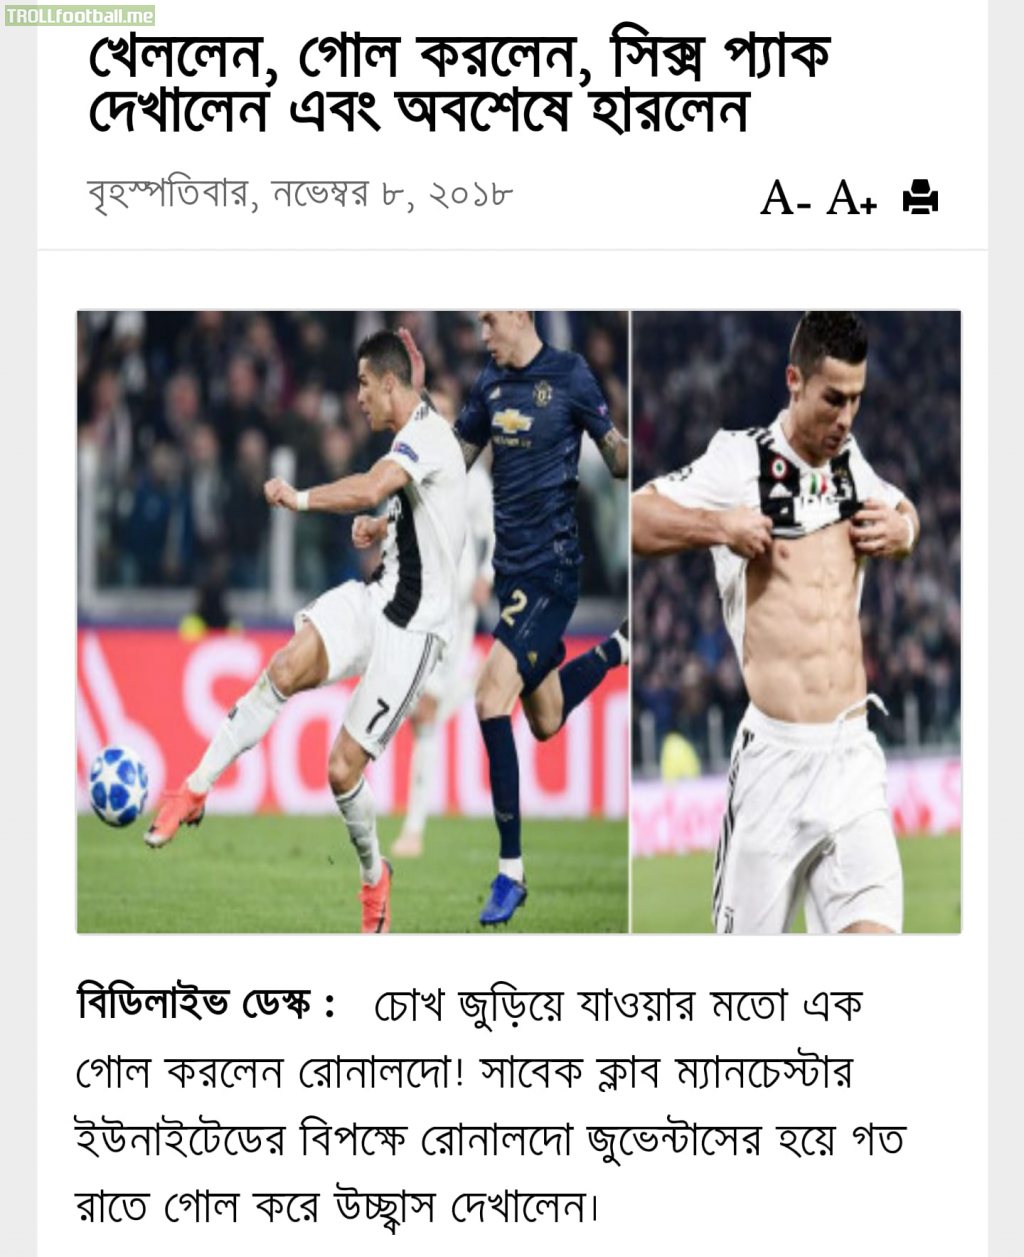 "He played, he scored, he flexed, and then he lost." - Hilarious headline summary of the Juventus vs Man Utd match in a Bengali newspaper.